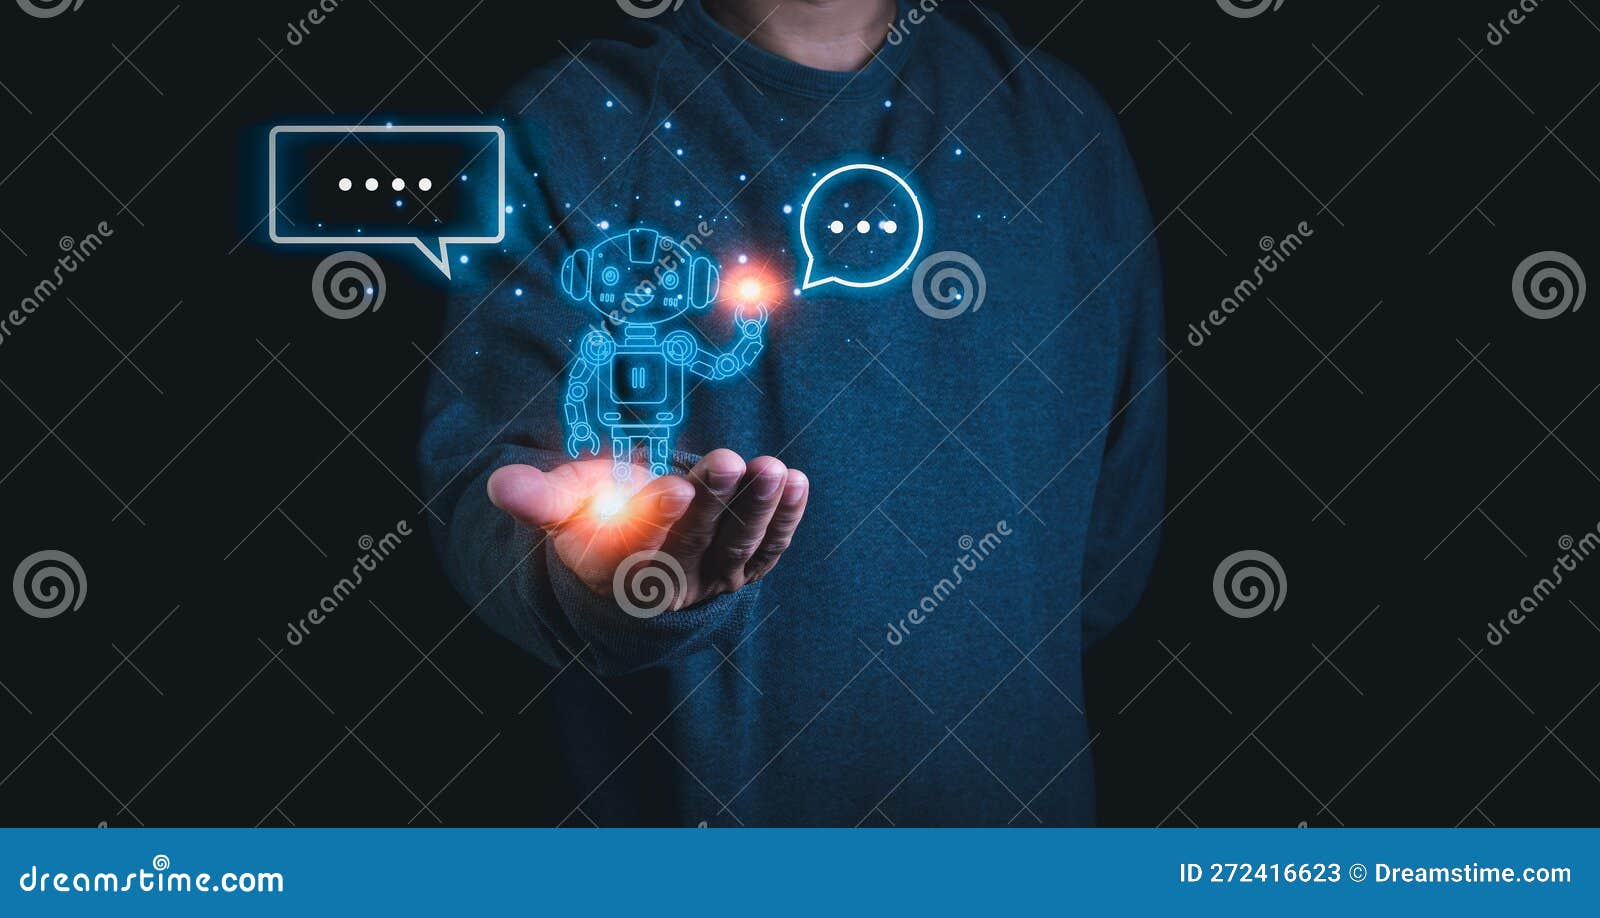 a person stretches out his hand with a model of a robot on his palm. demonstrates the use of ai and chat gpt systems to research